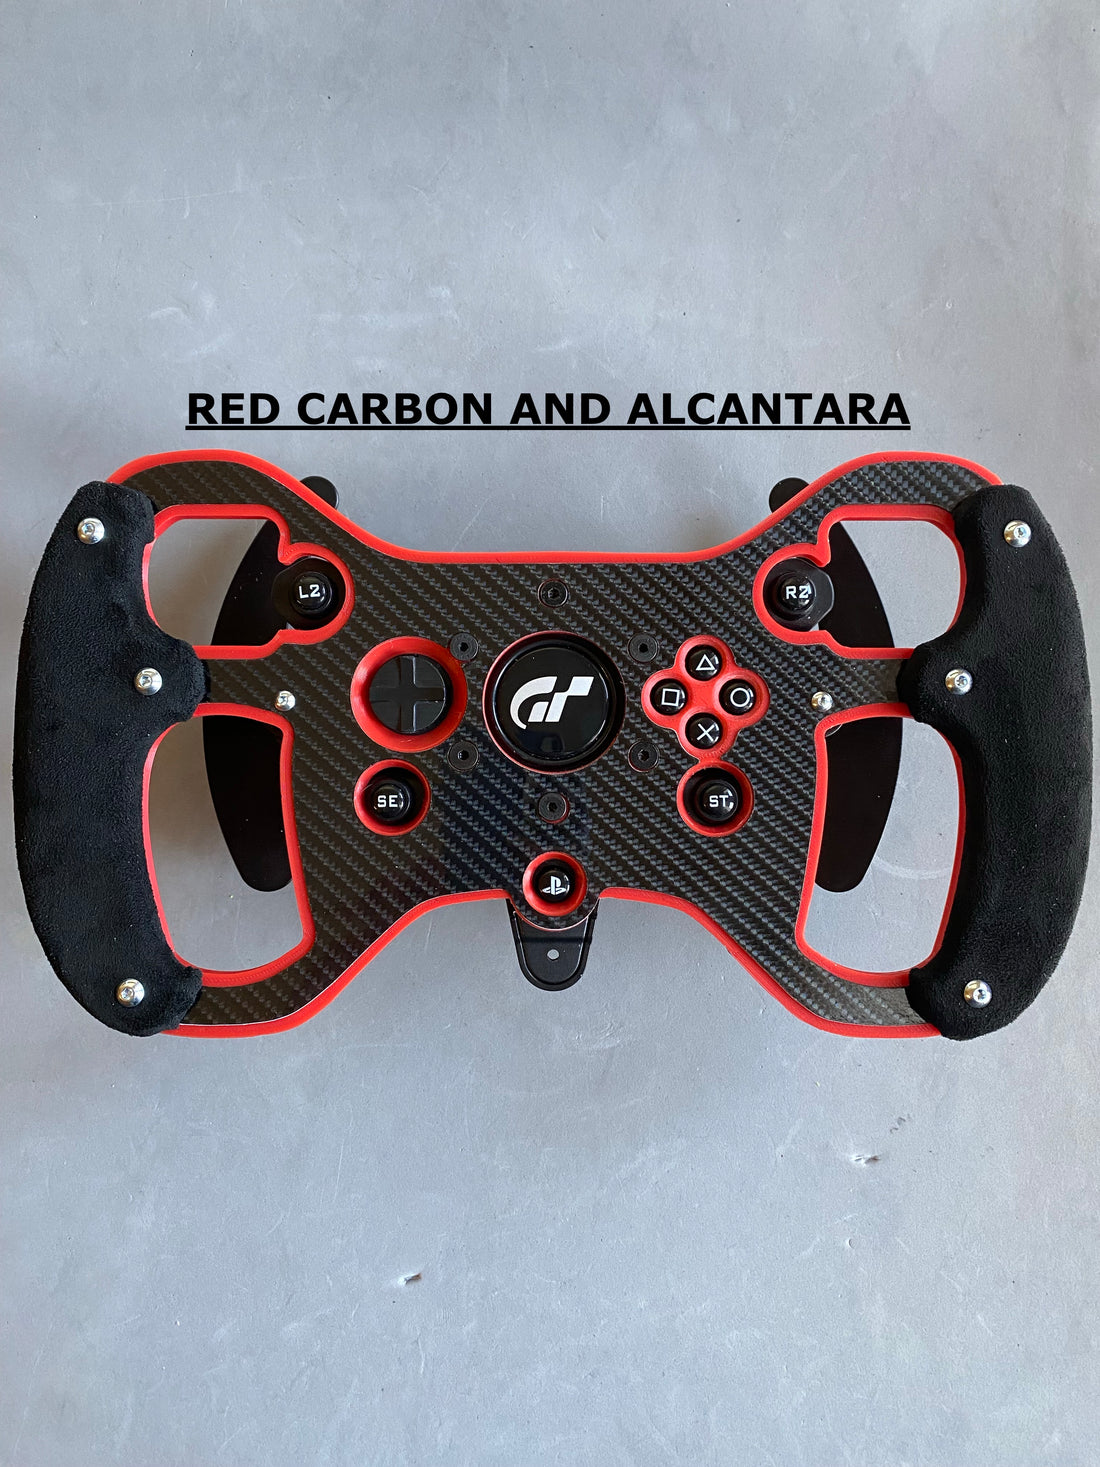 New Alcantara F1 Open Wheel Mod for Thrustmaster T300, different colors